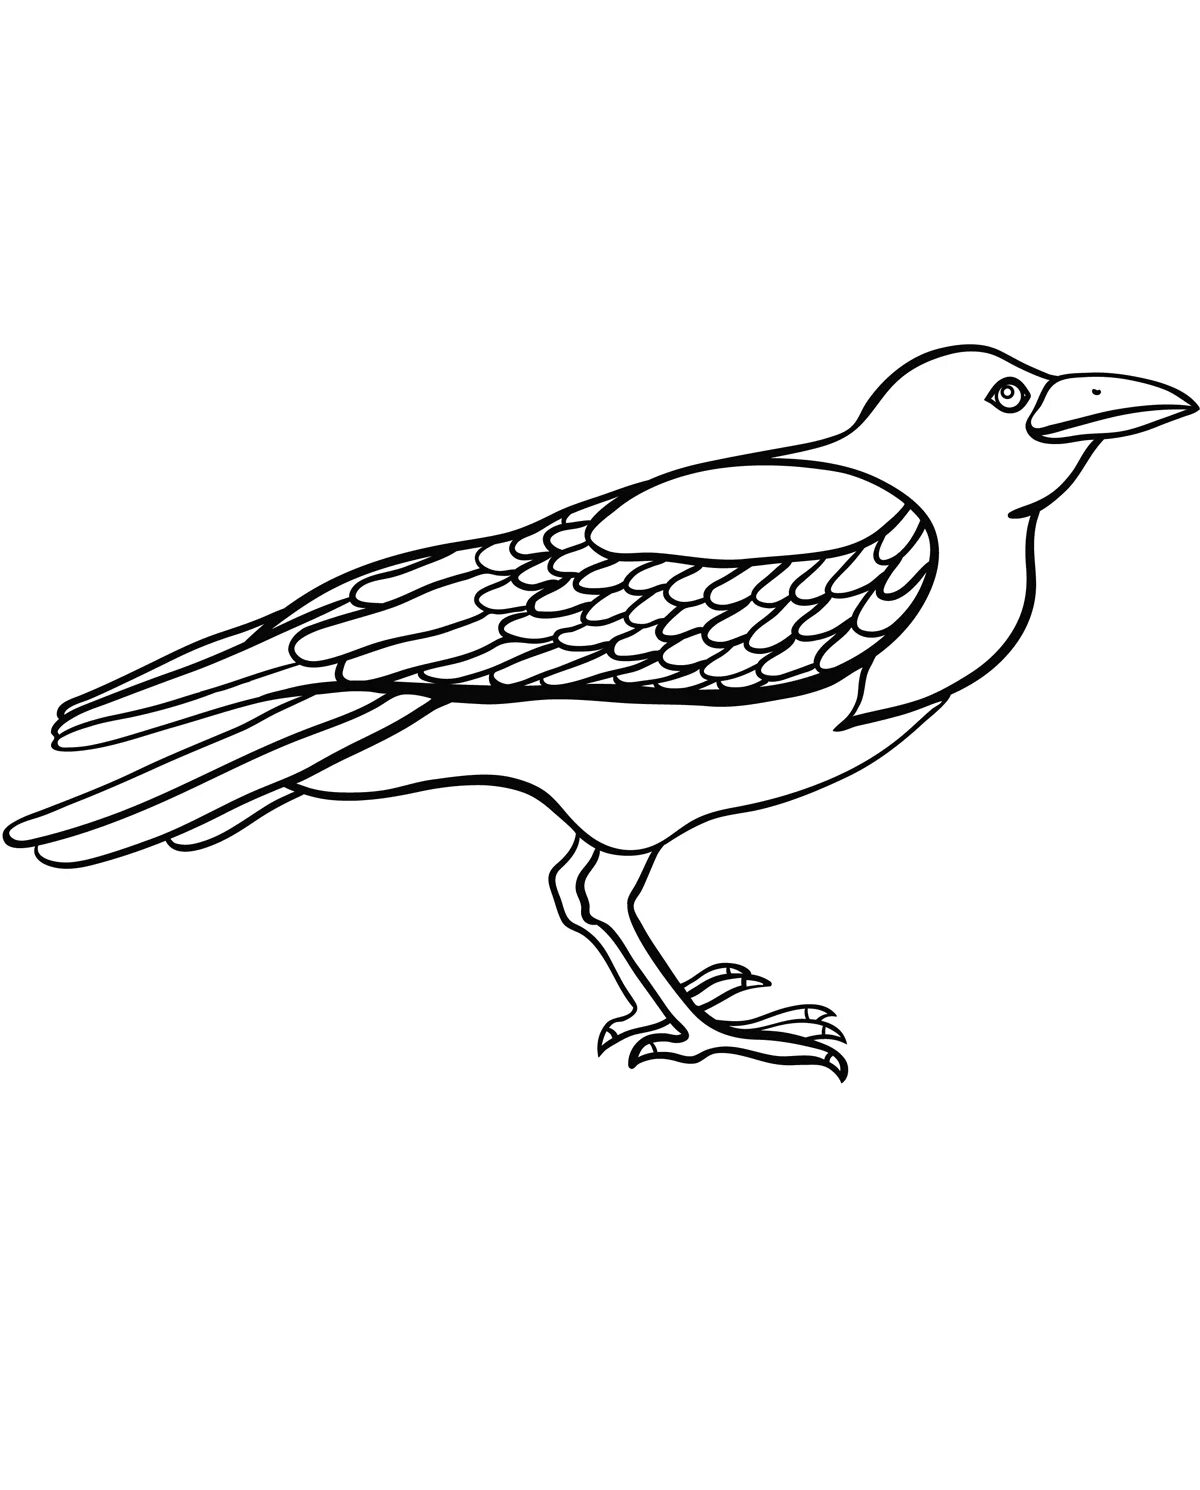 Incredible crow coloring book for 3-4 year olds